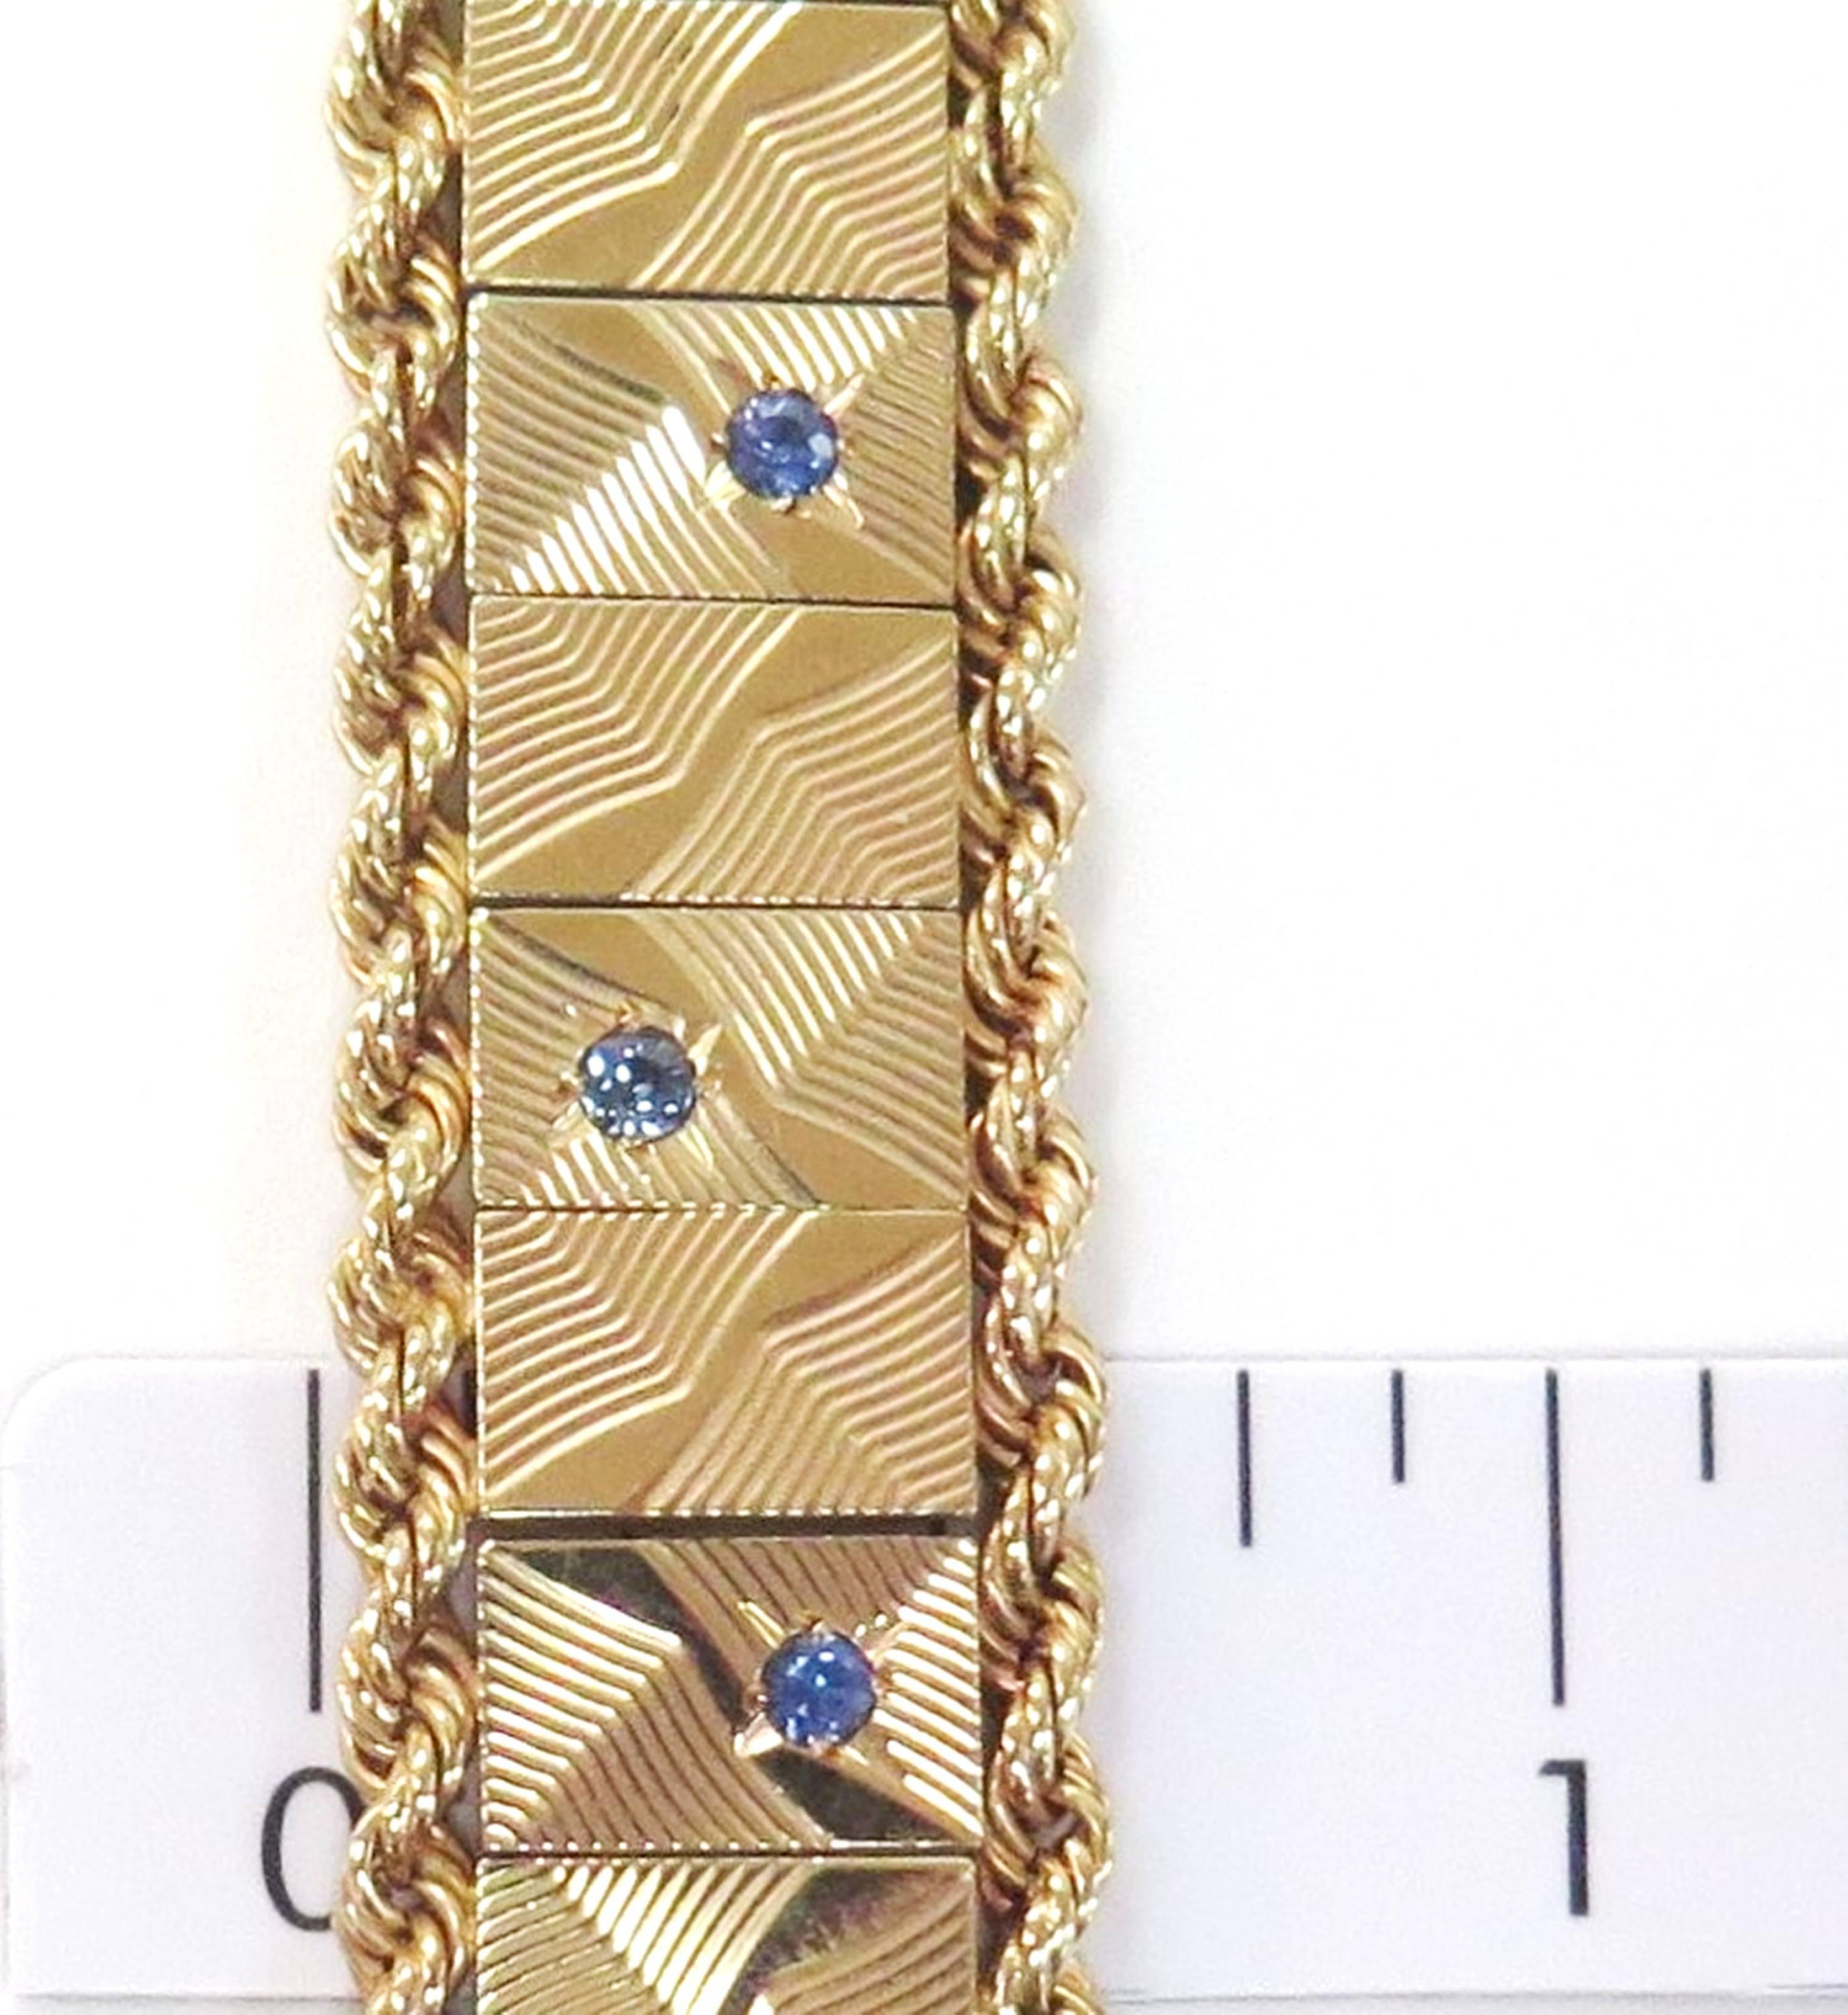 1950s Bracelet with Sapphires in Faceted Starbursts, 14 Karat Yellow Gold In Excellent Condition For Sale In Bellmore, NY